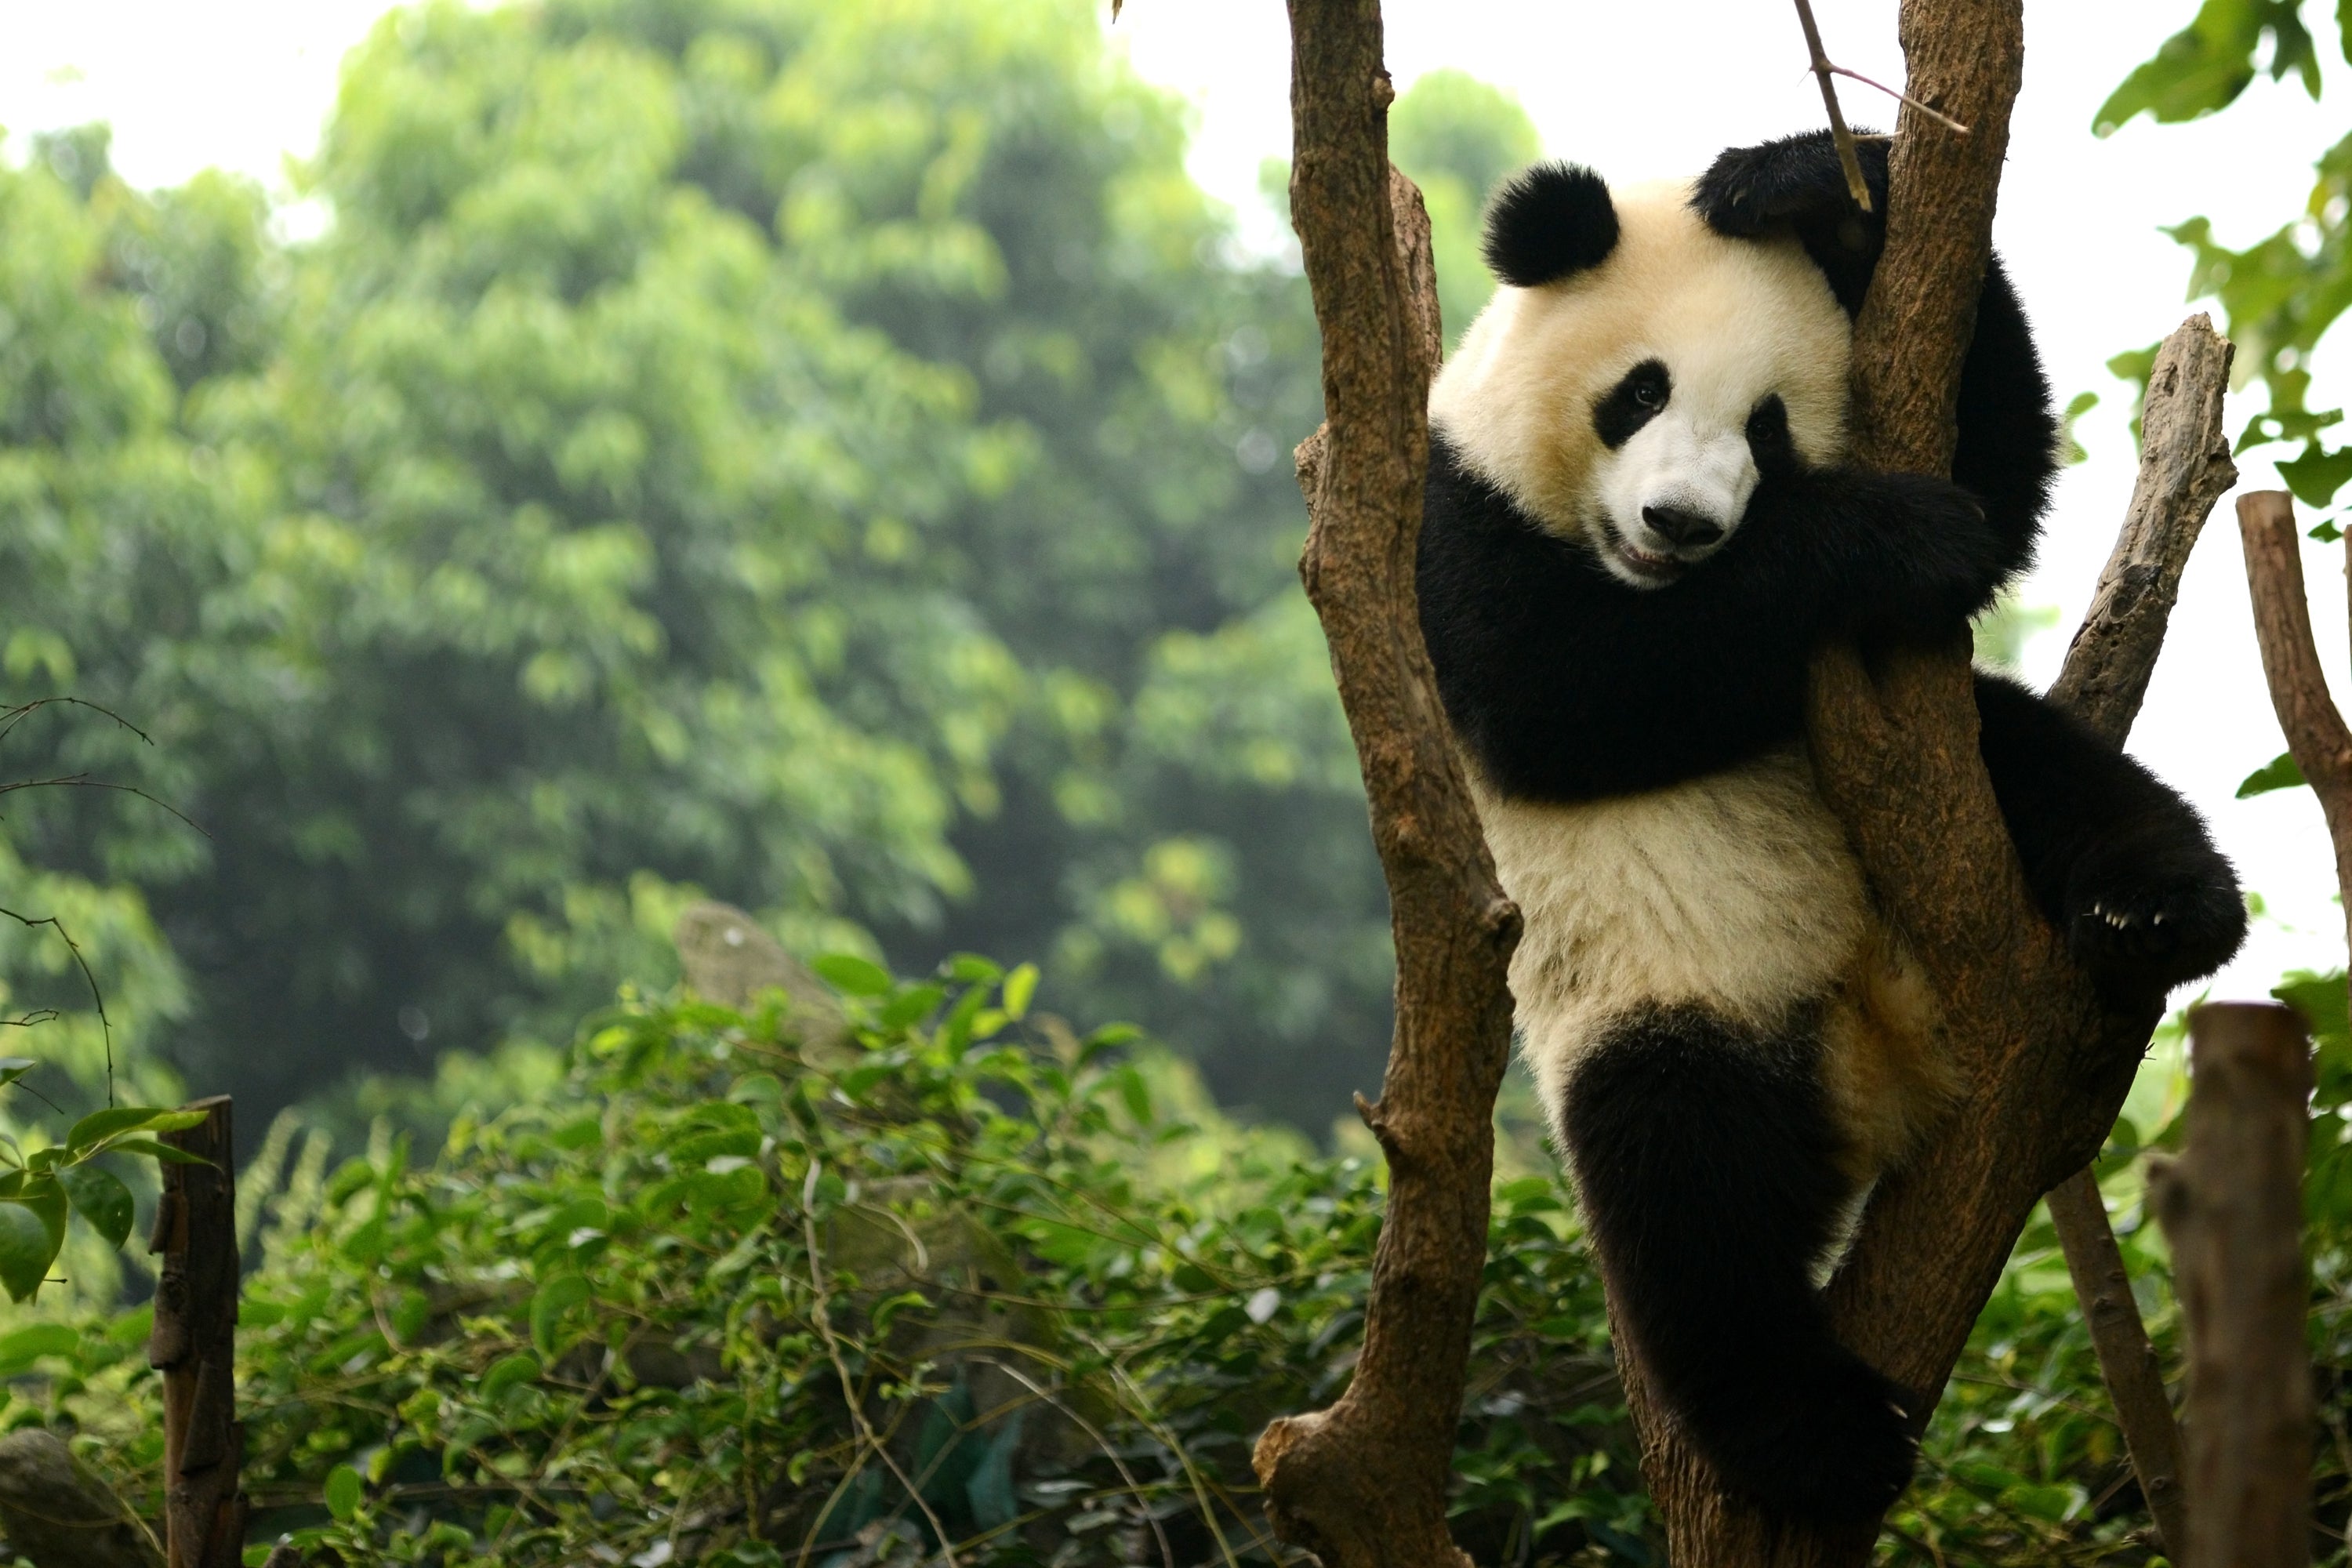 Standout species: But the giant panda is actually cleverly camouflaged